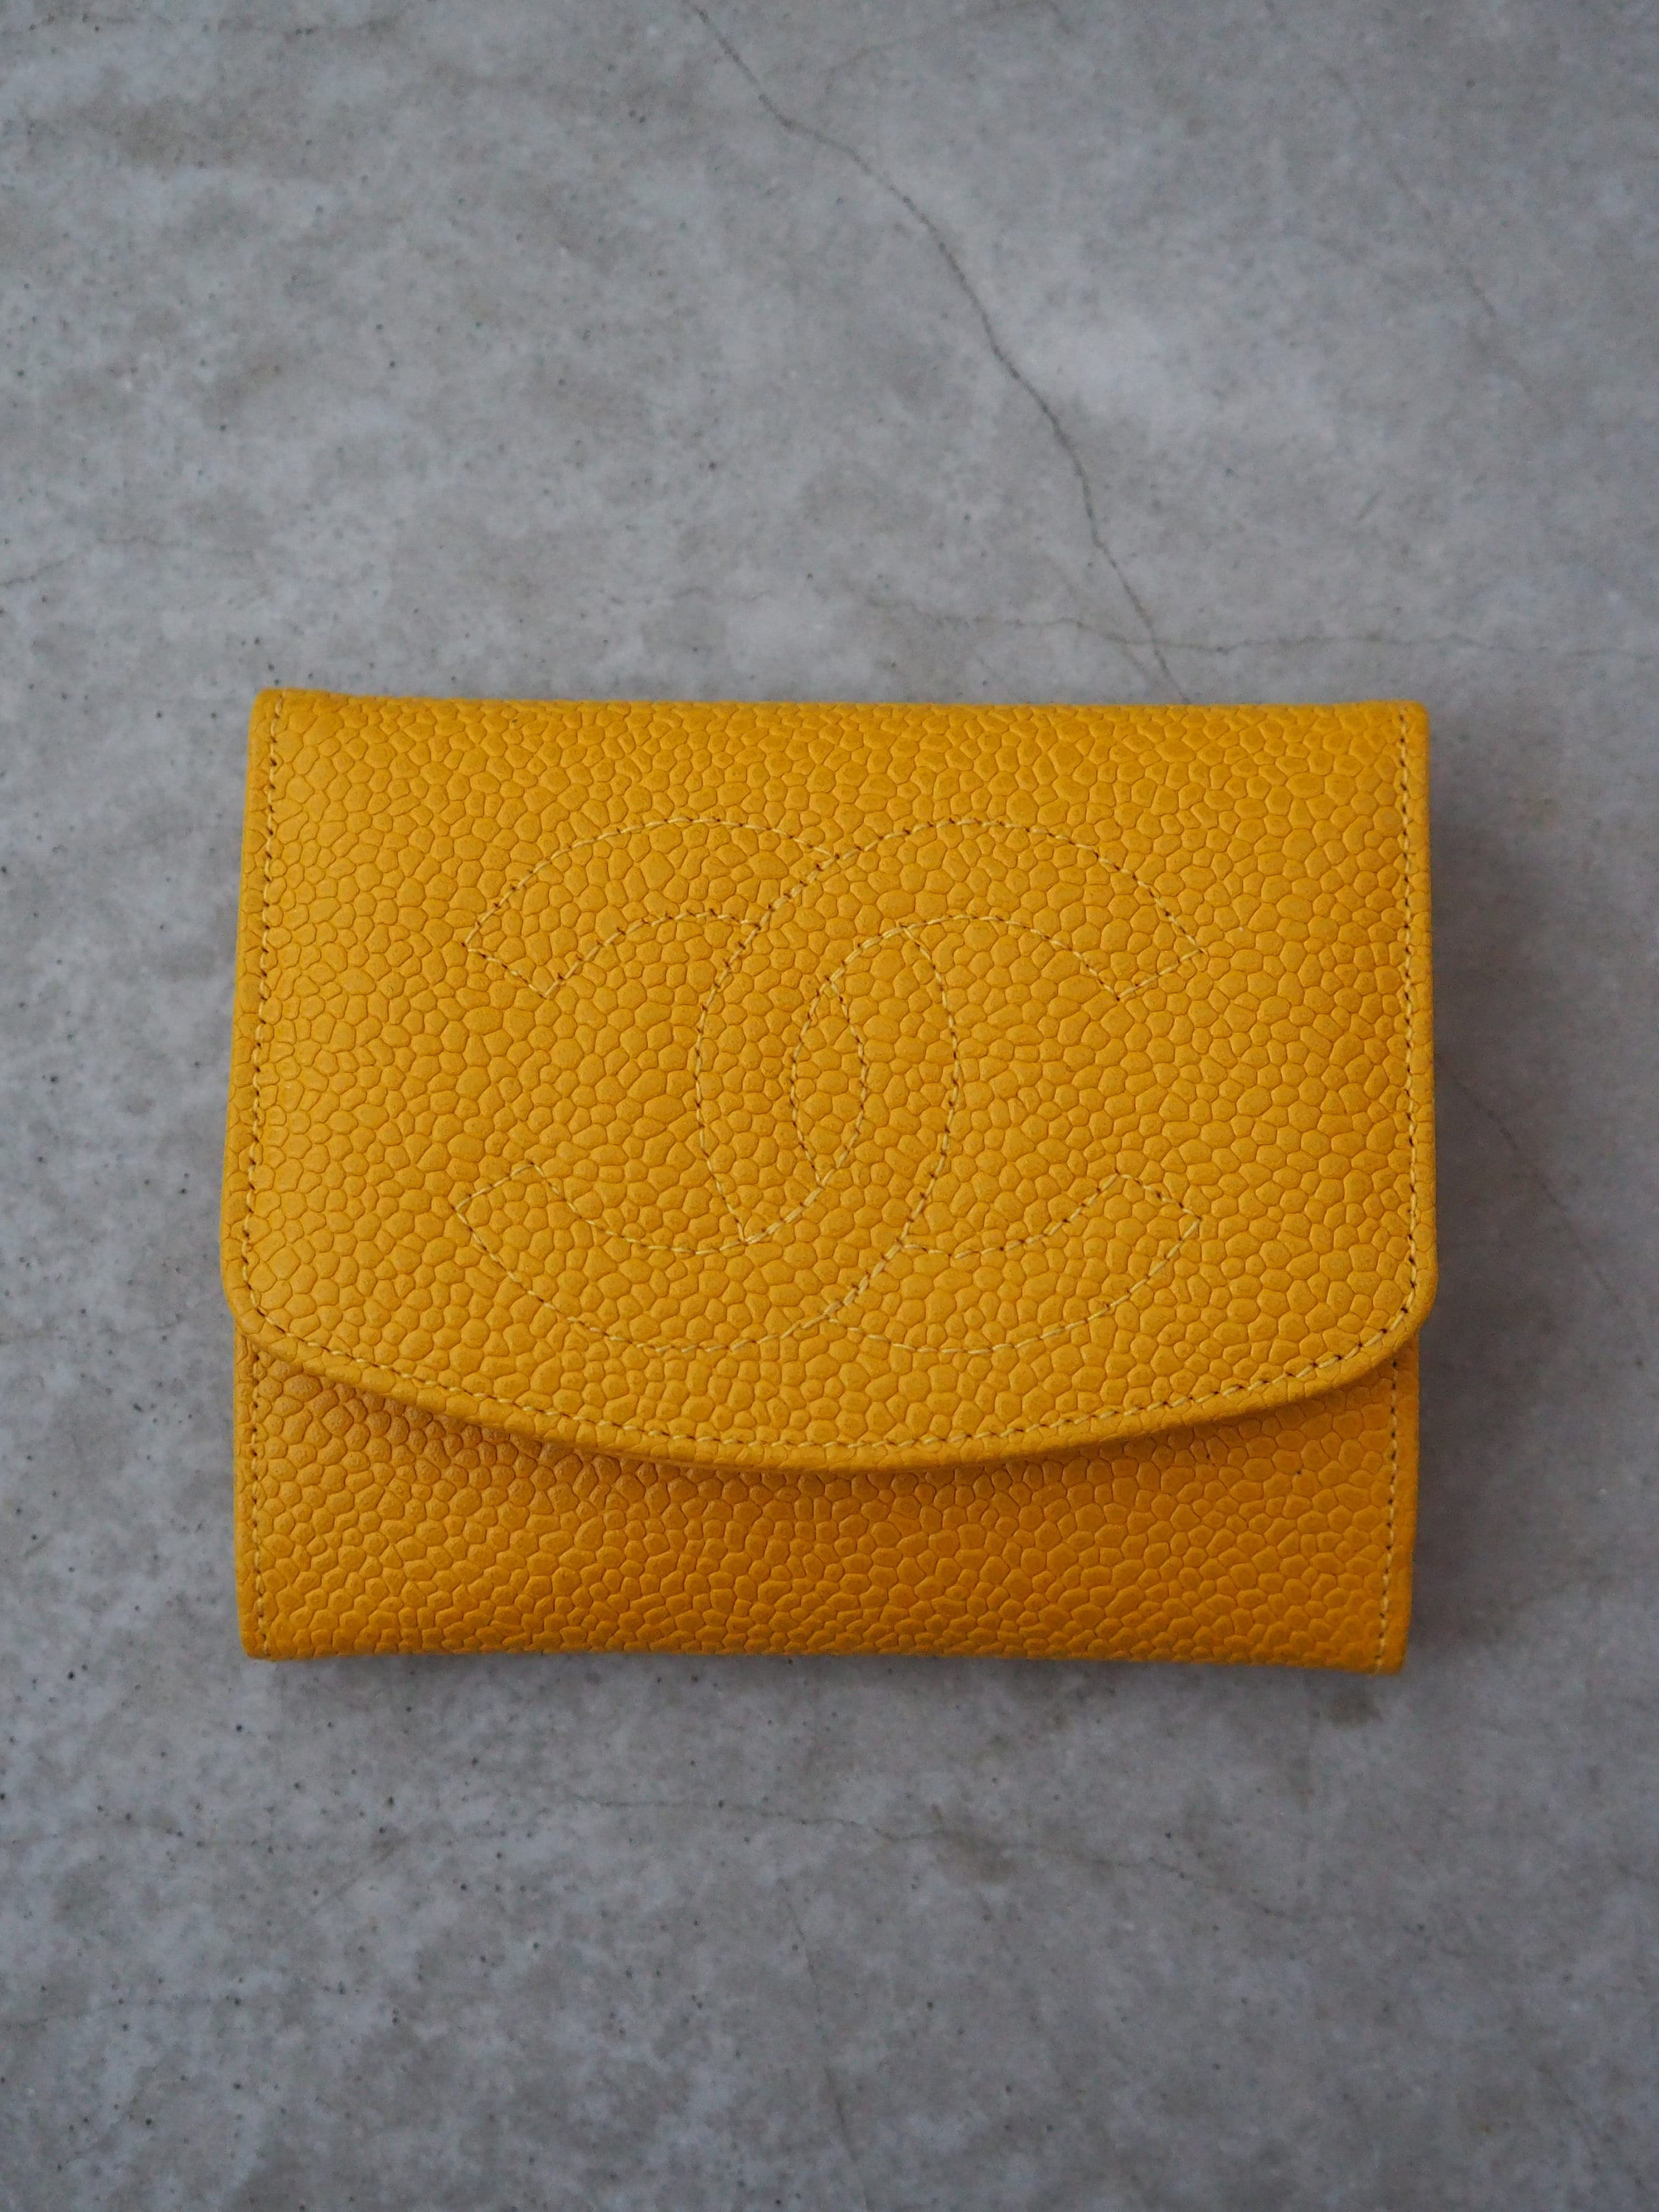 CHANEL COCO Coin Card Wallet Purse Compact Caviar Skin Leather Yellow Authentic Vintage Box